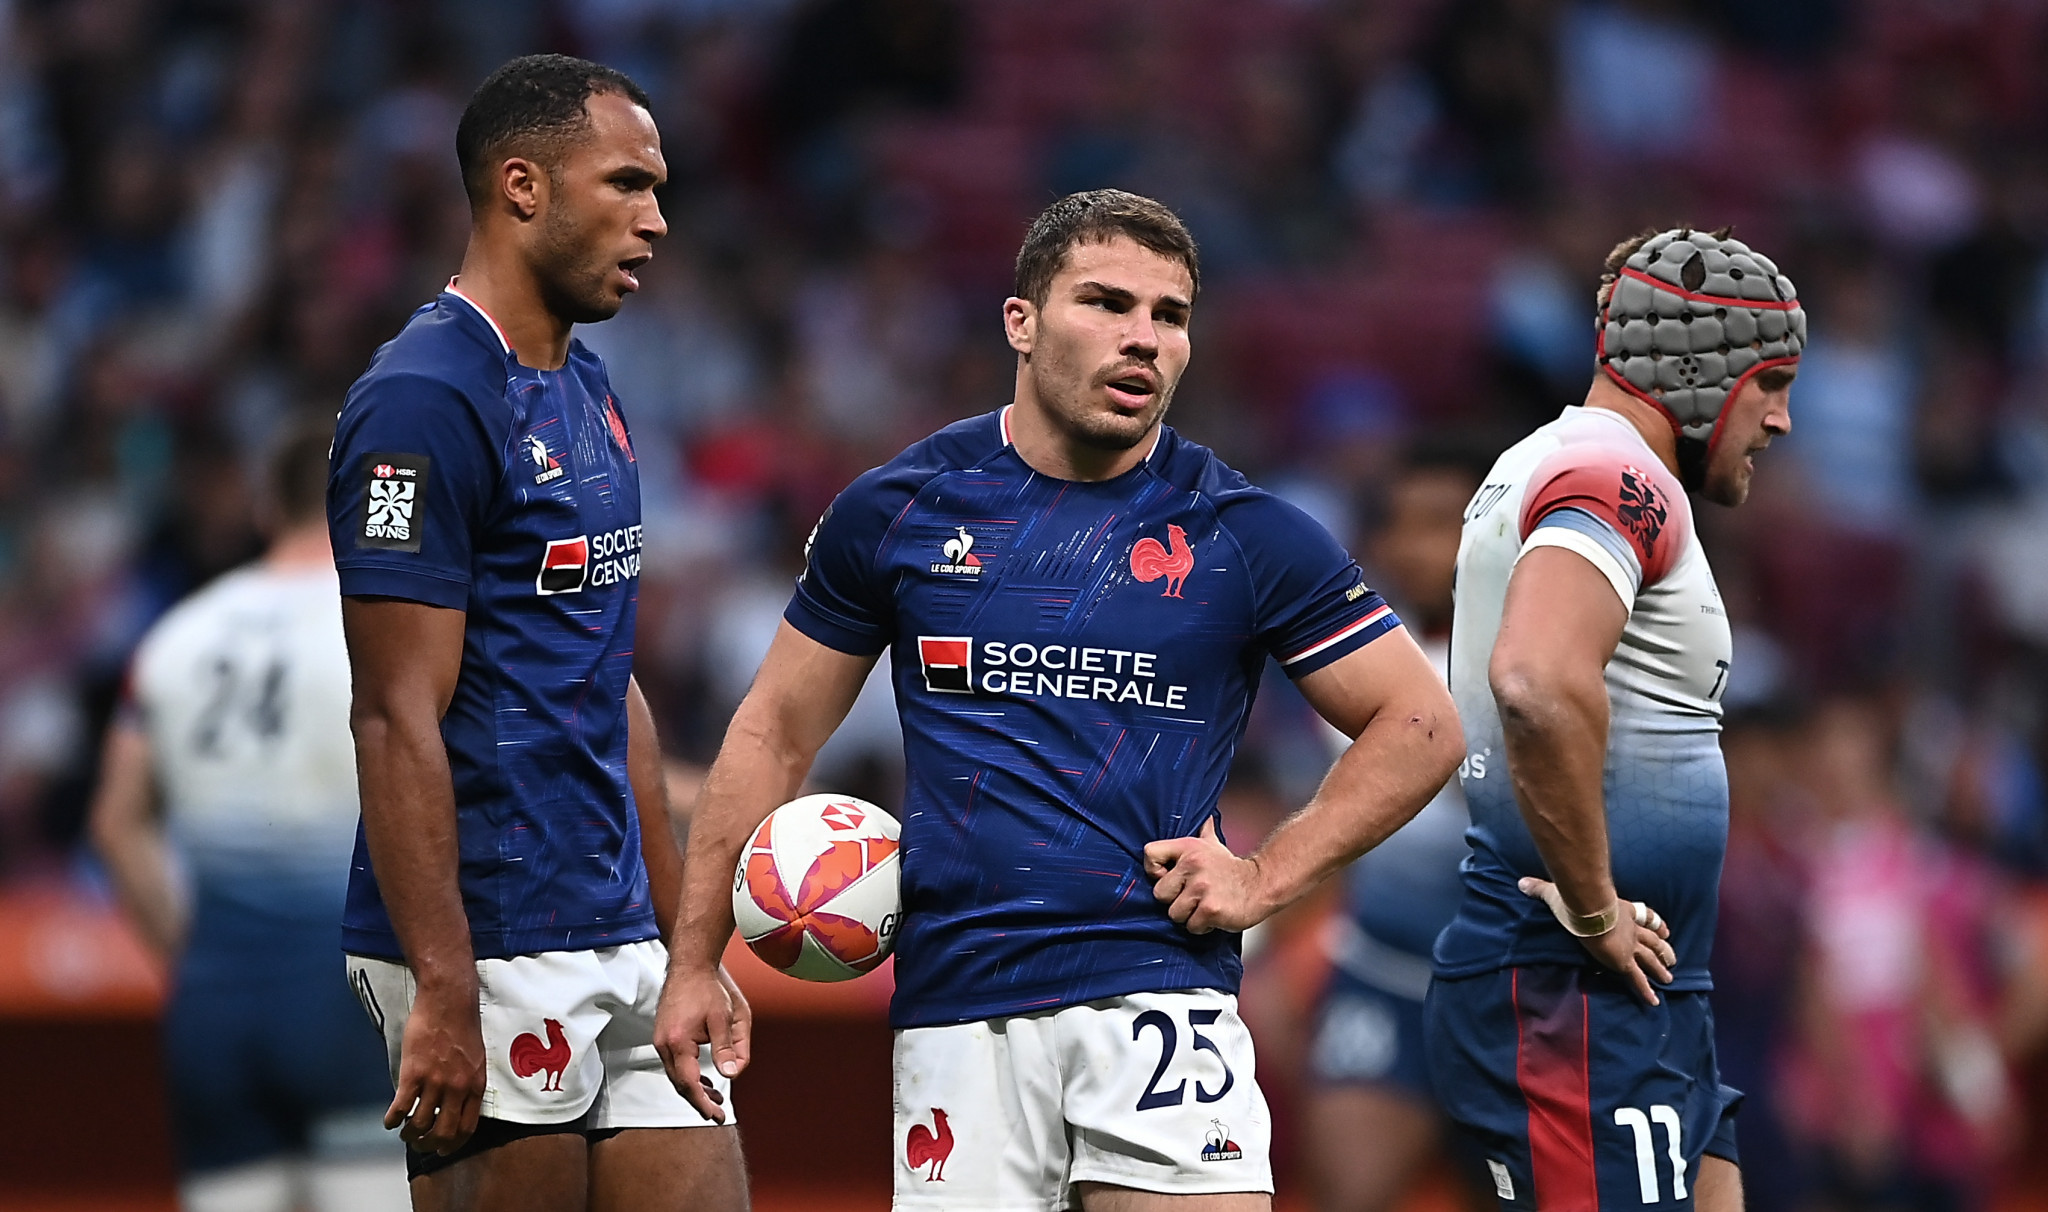 Antoine Dupont did not feature in the Six Nations to focus on his Olympics preparations. GETTY IMAGES